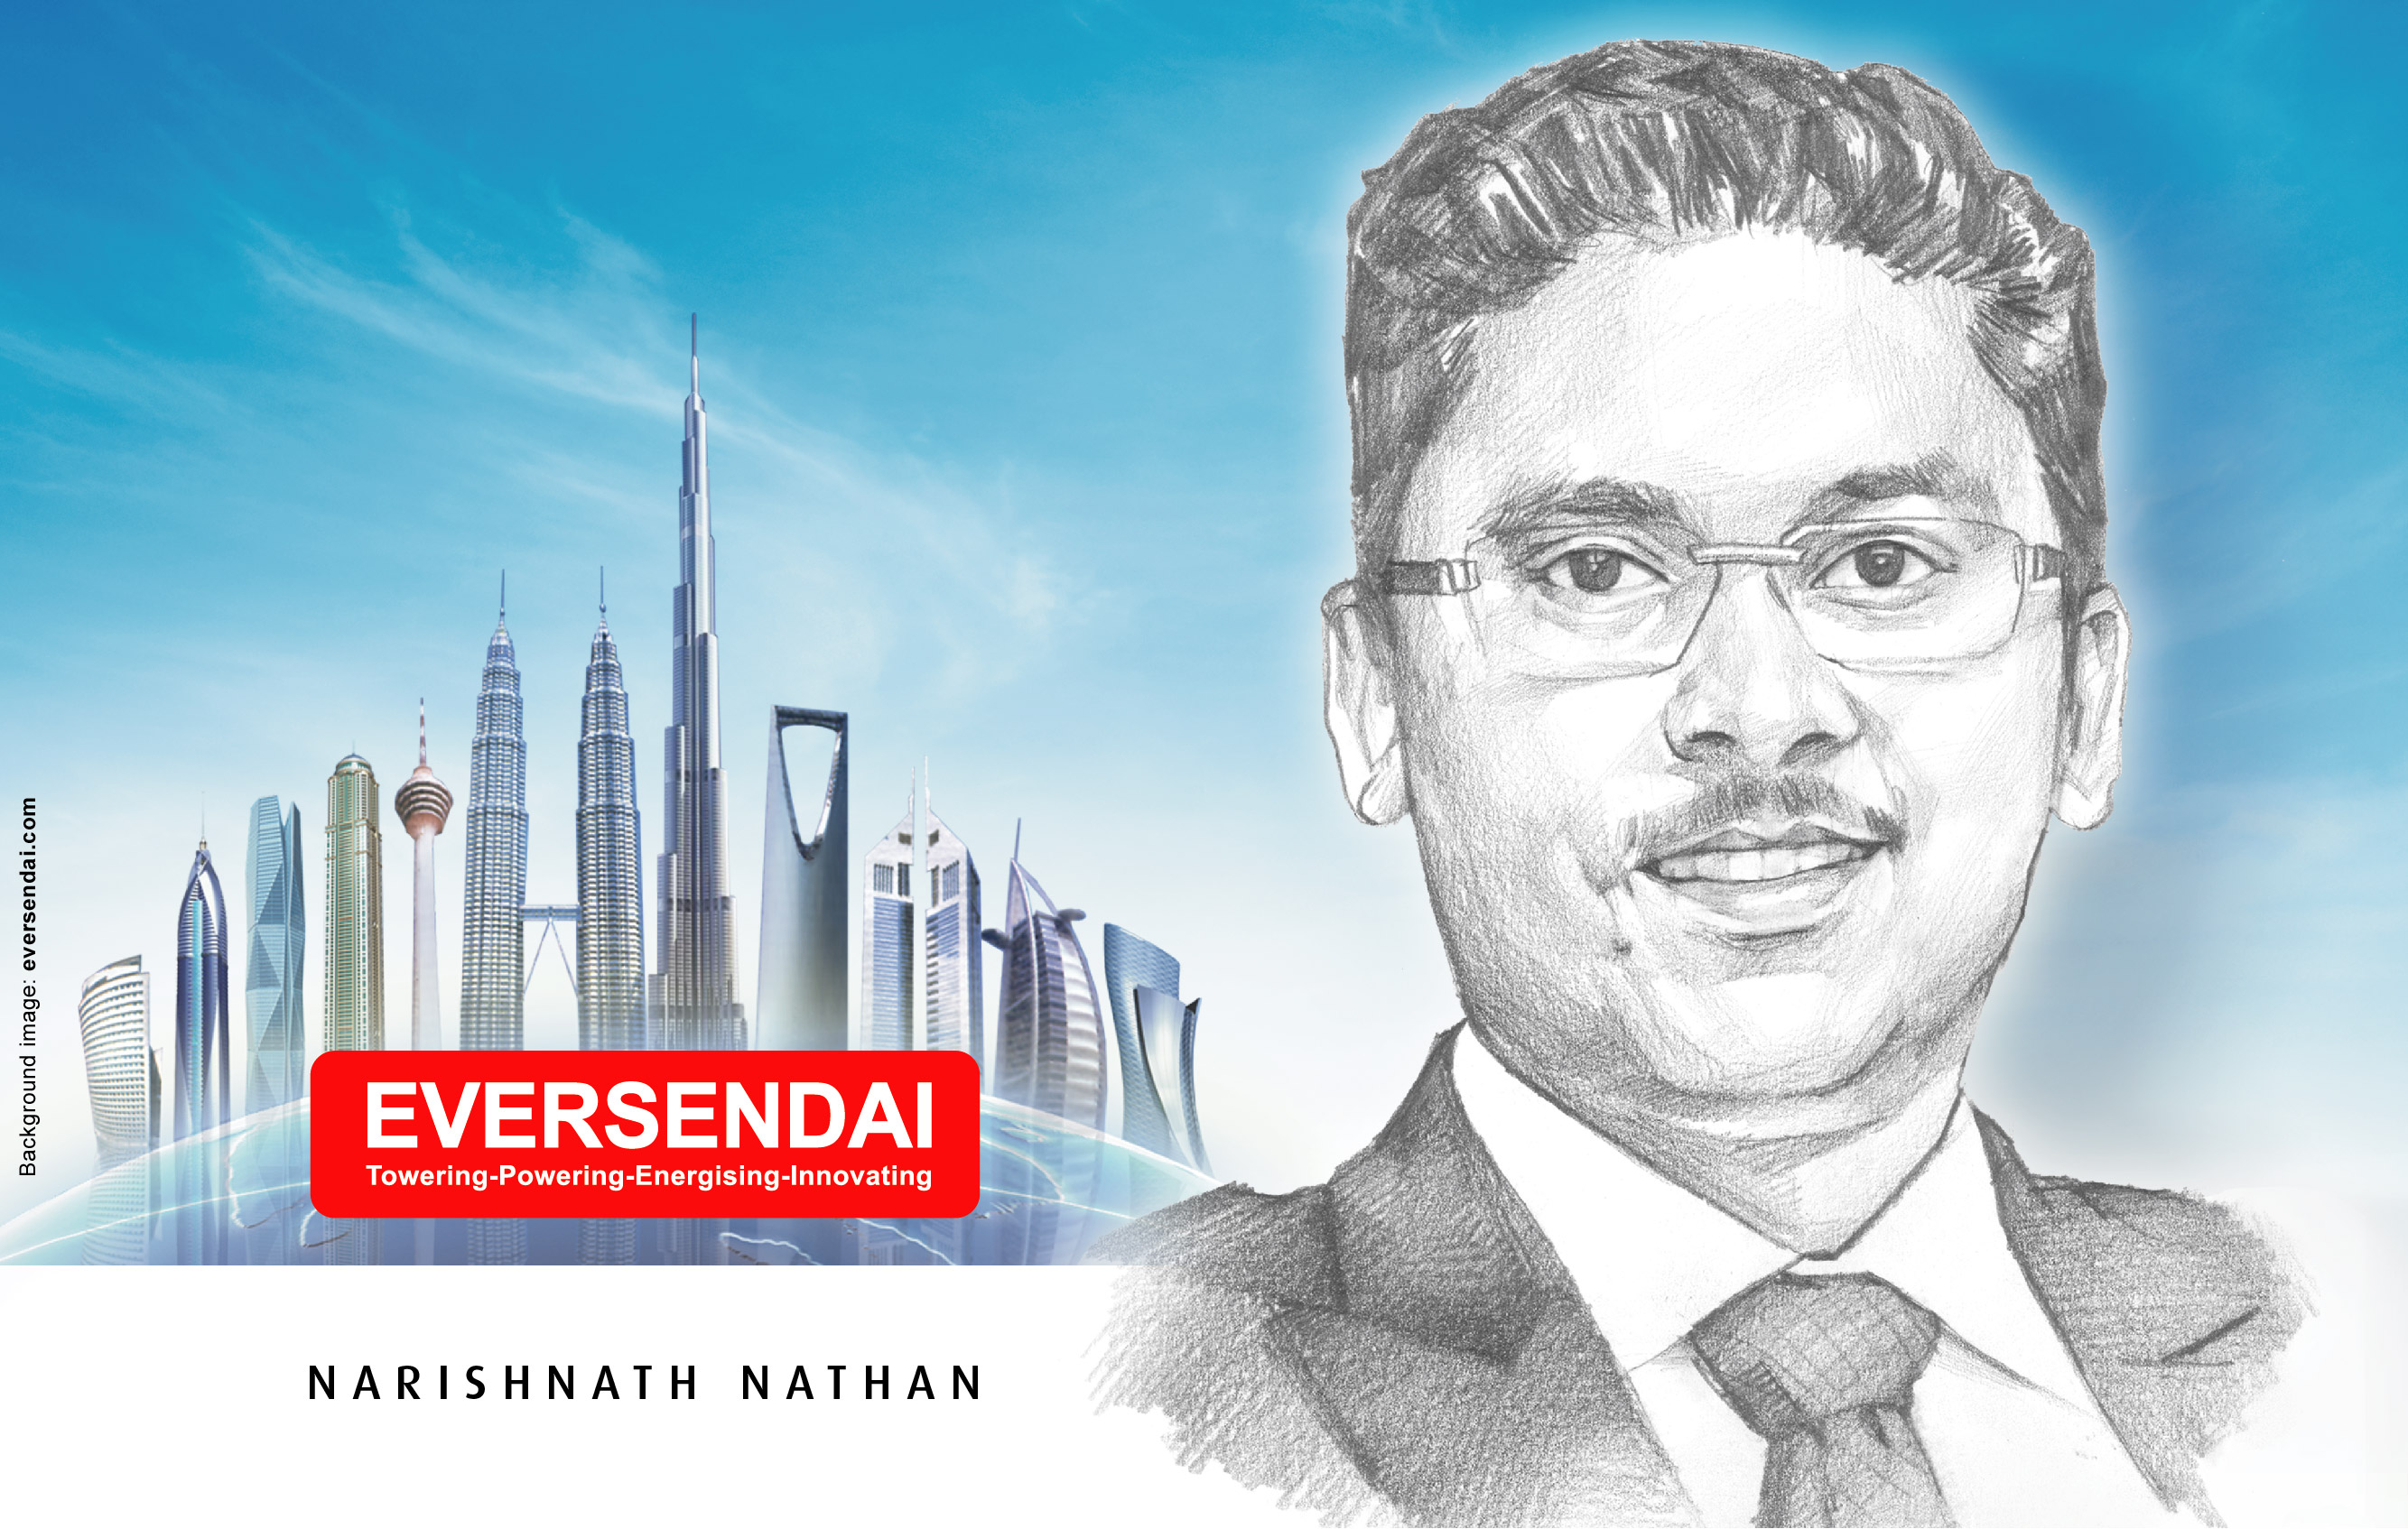 Tan Sri Nathan's son, Narishnath appointed as Deputy MD Eversendai - Next Gen in place